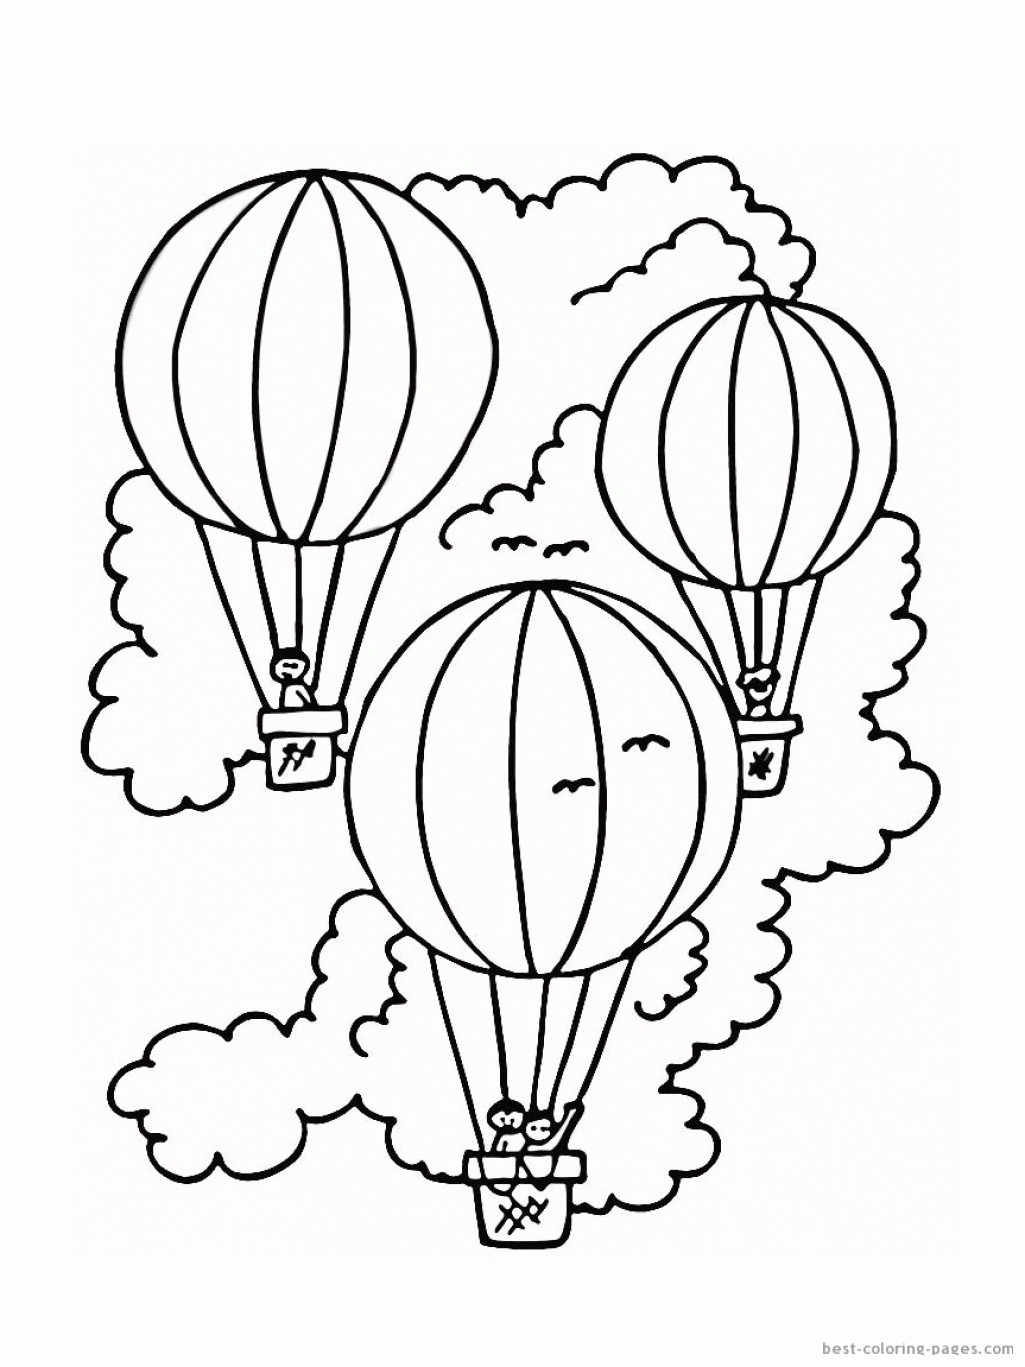 Transportation Coloring Pages Best Coloring Pages Free Air ...